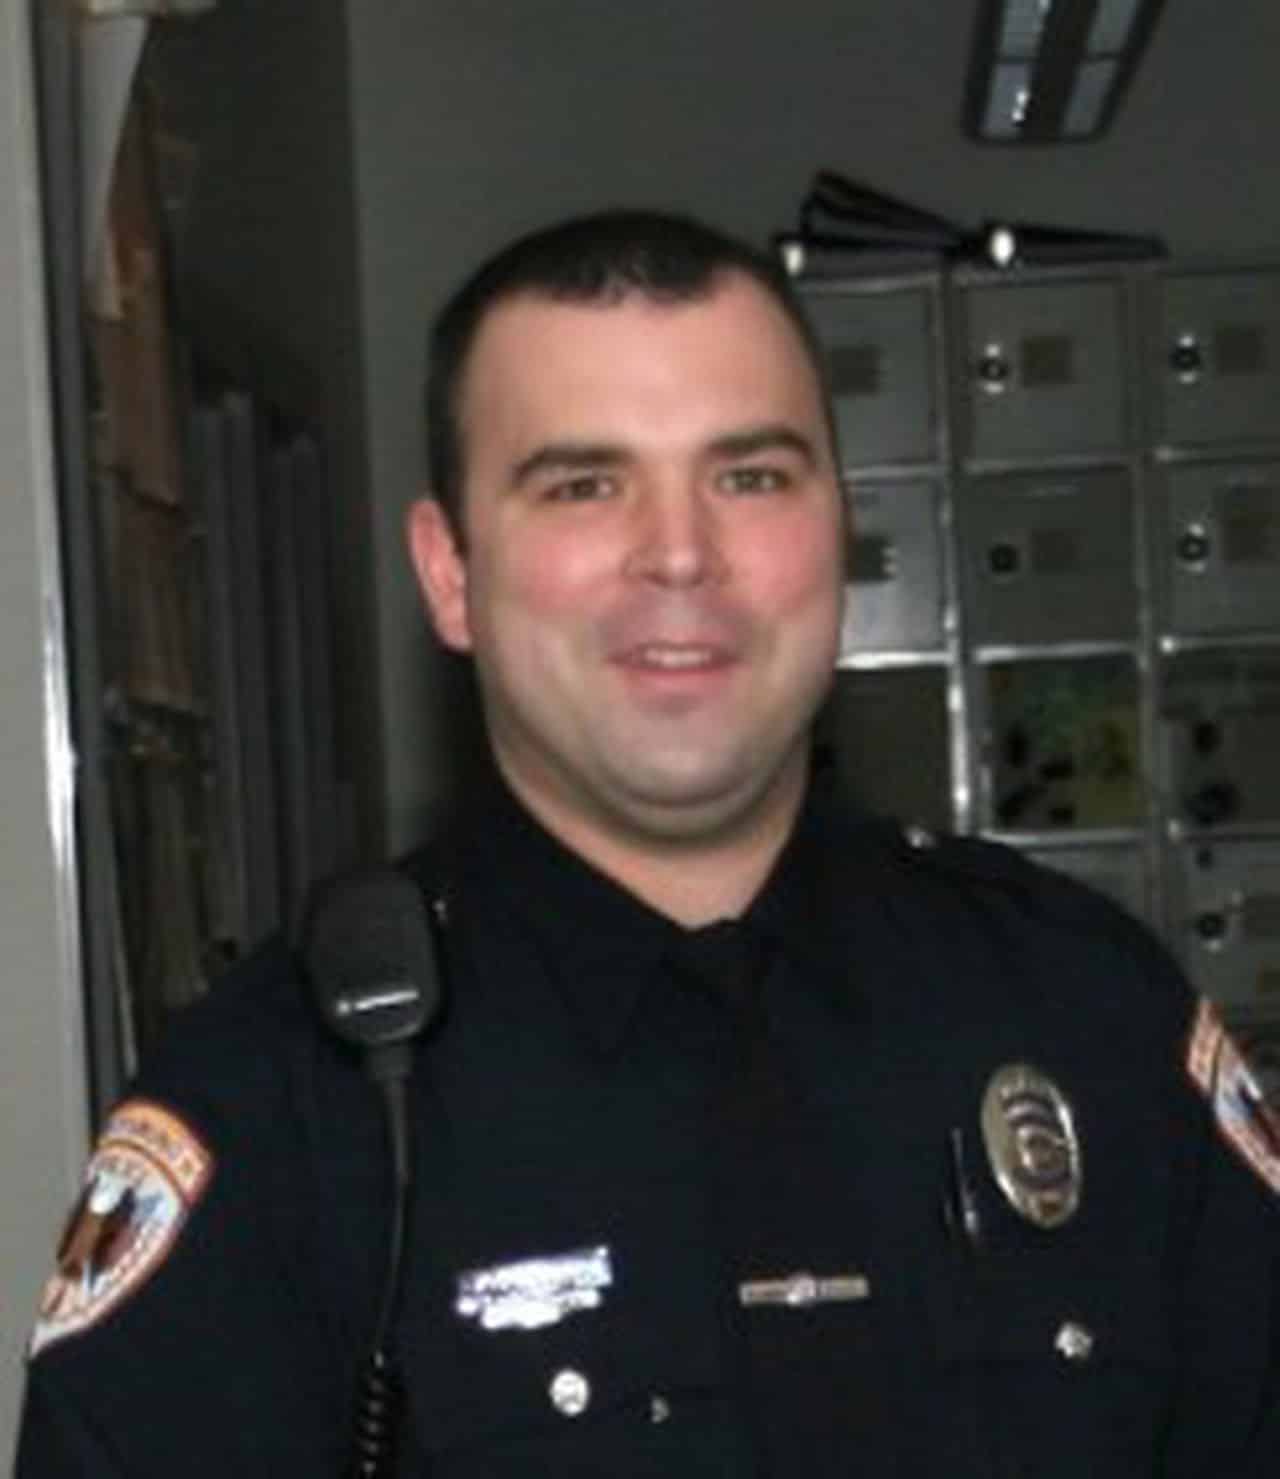 Wyoming Police officer thrown 30 feet when hit by truck at crash scene ...